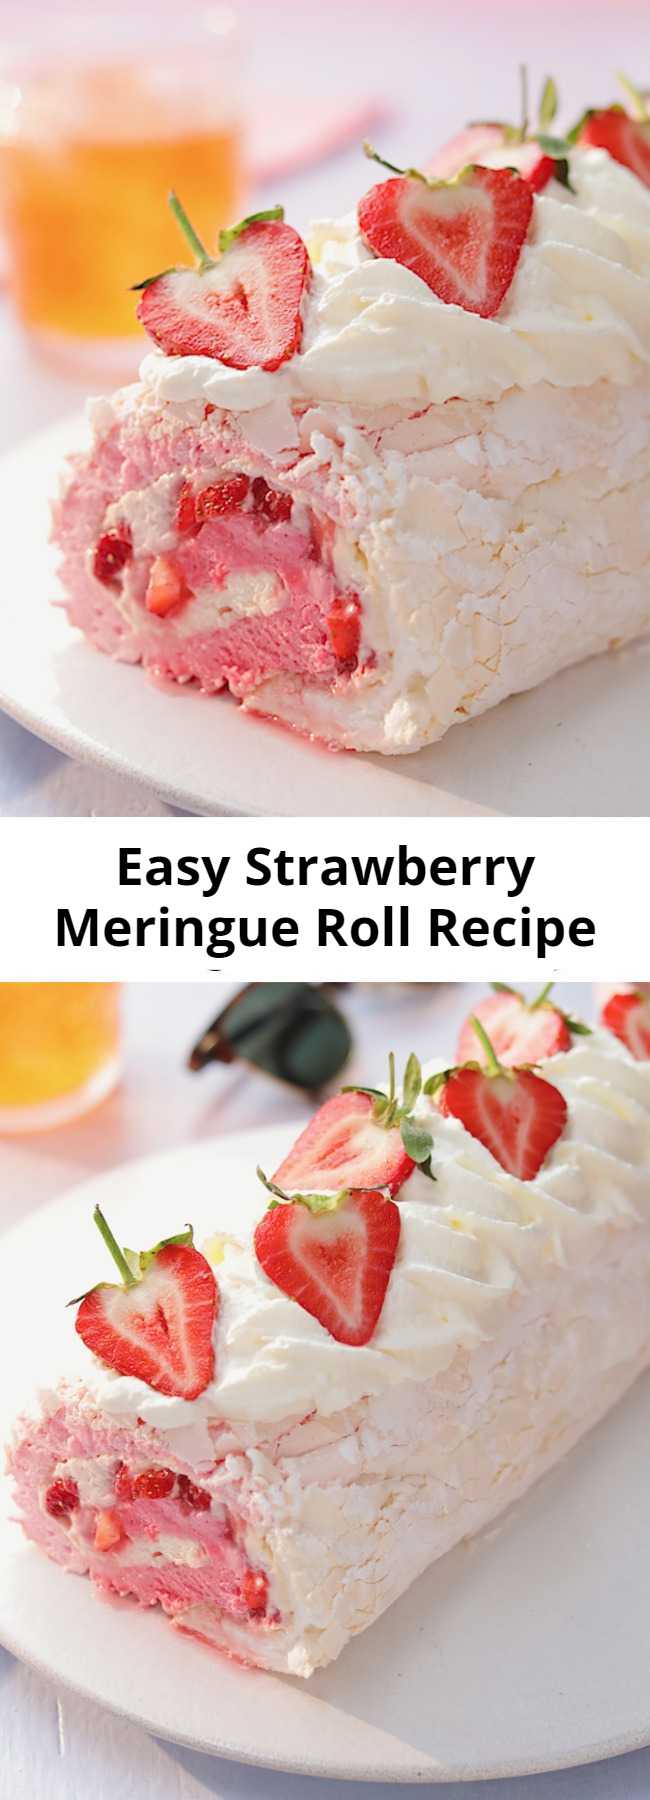 Easy Strawberry Meringue Roll Recipe - We've combined a pavlova and a swiss roll to make your ultimate fruity dessert! This strawberry meringue roll is a sure crowd pleaser!